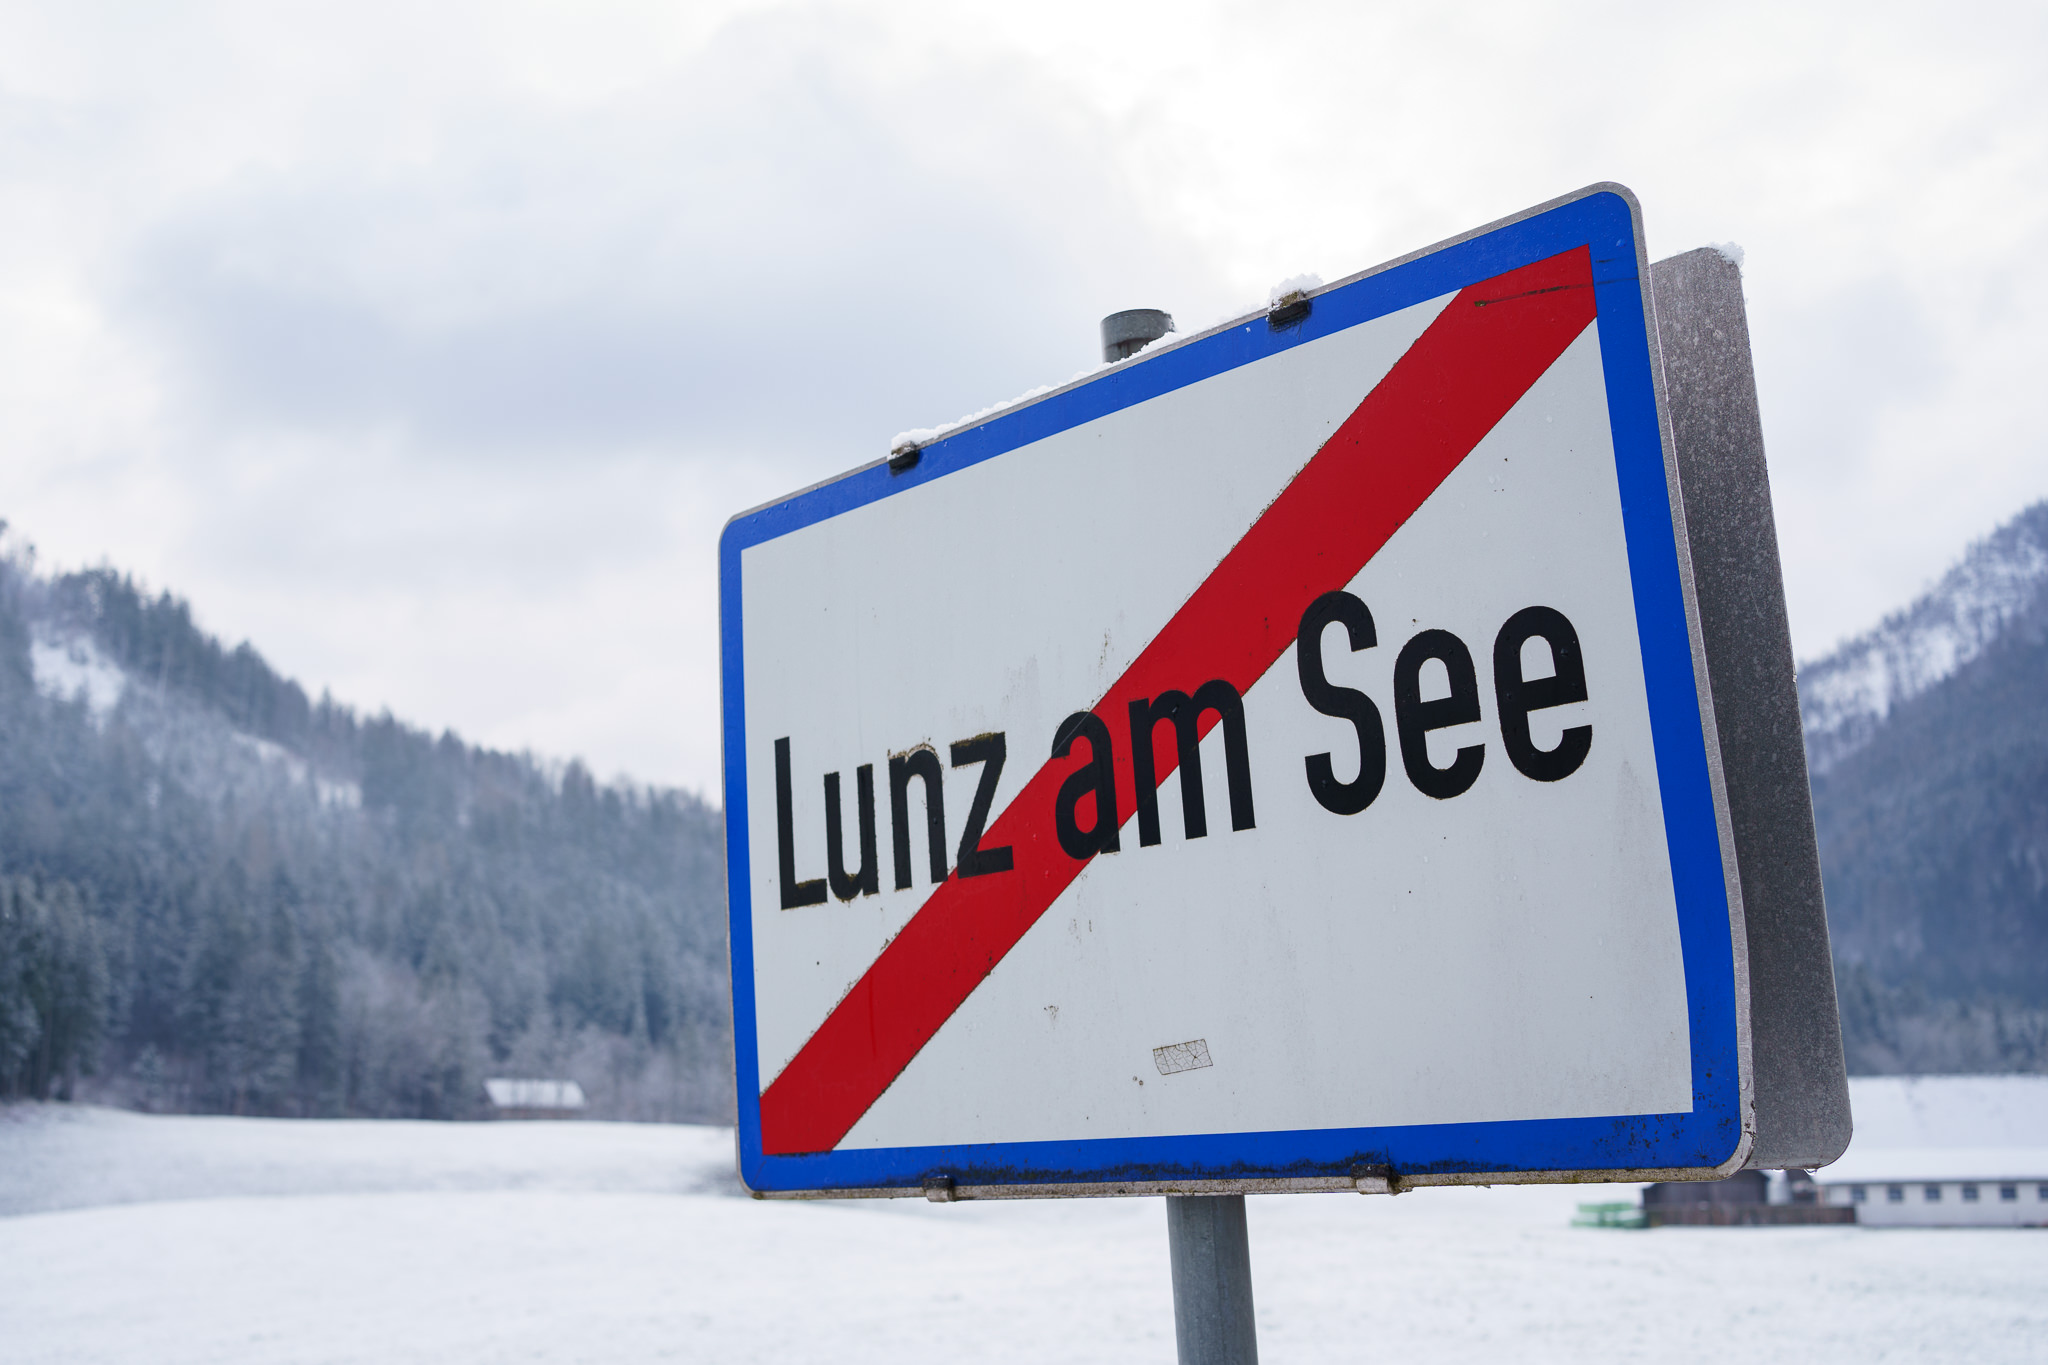 Lunz am See, Easter Sunday 2021